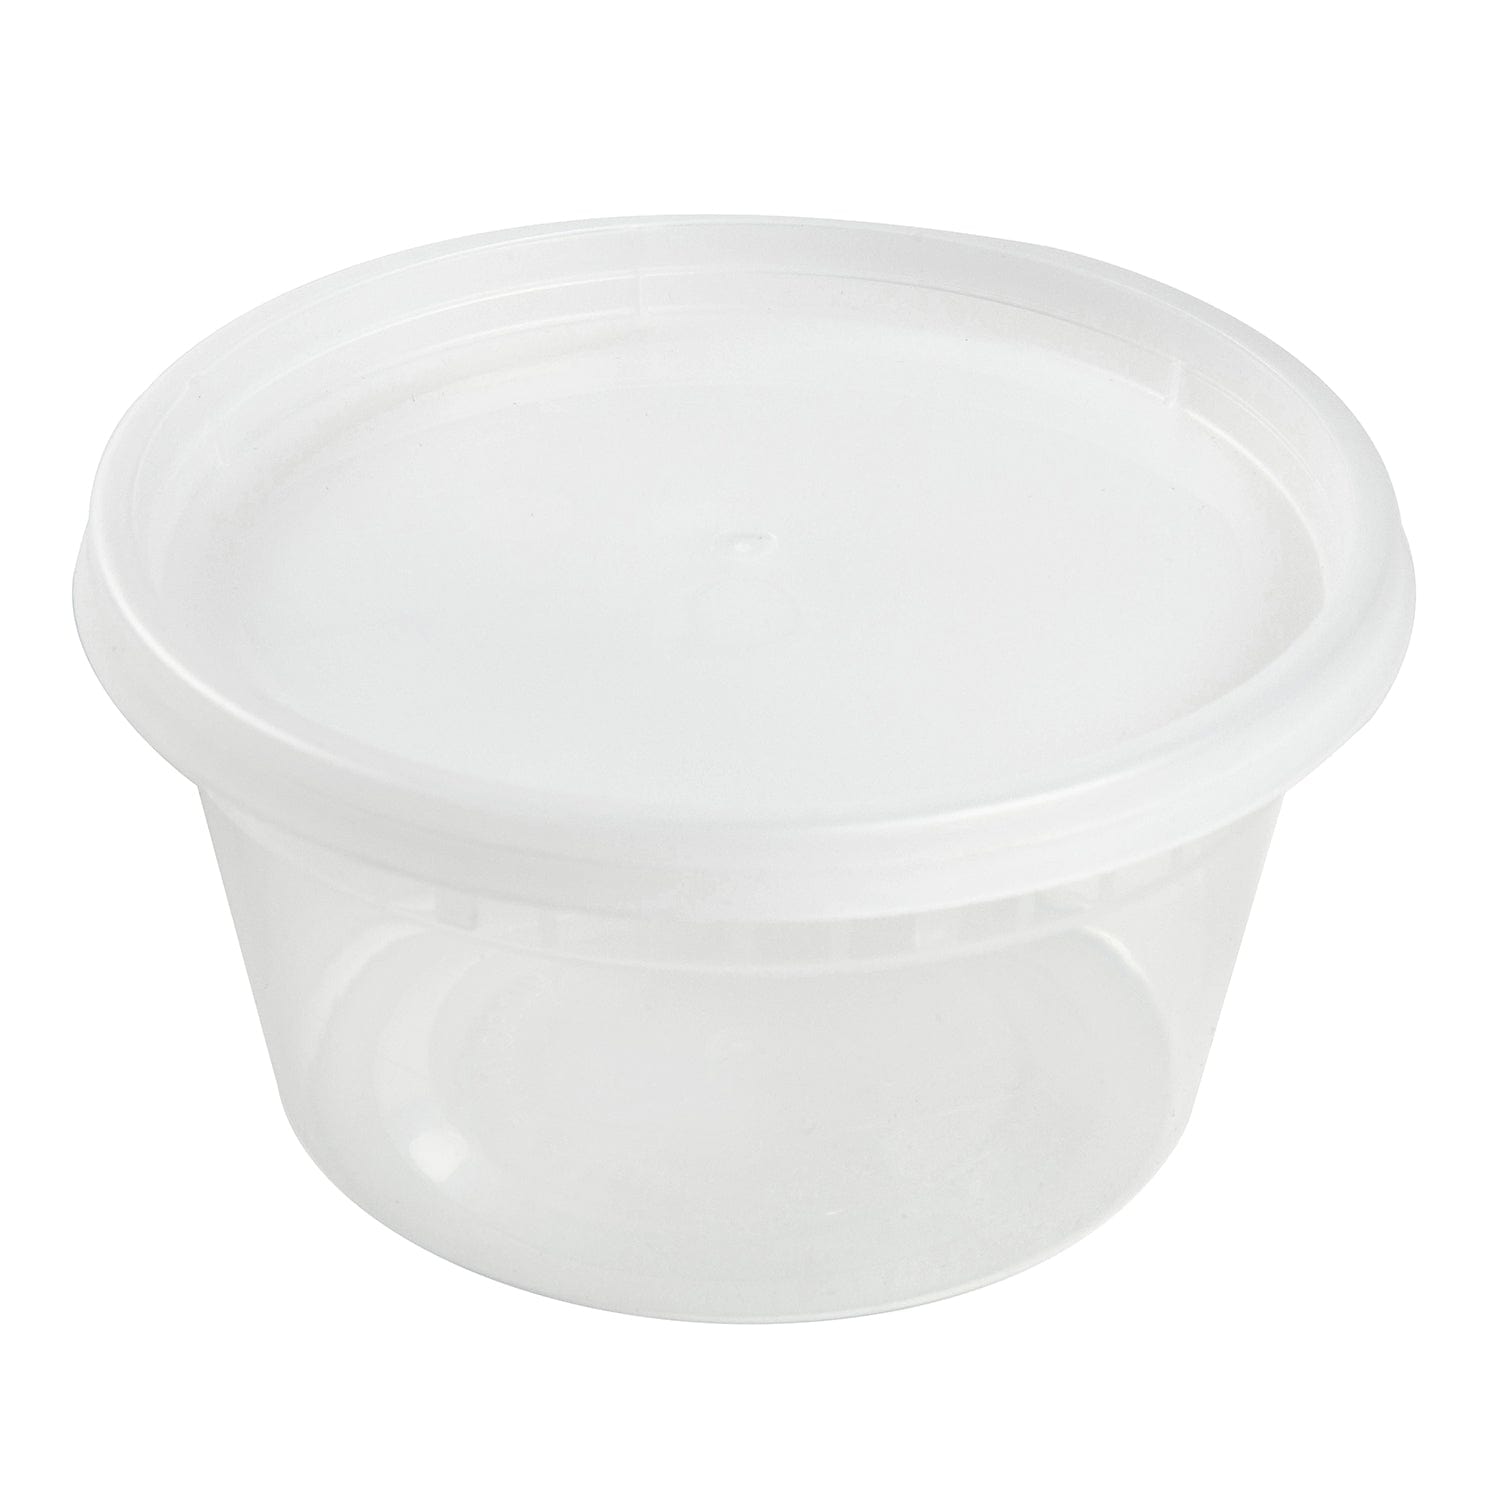  Disposable 16 oz Plastic Containers With Lids - 240 Of Each  Containers And Lids - Leak Resistant Containers For Food - Deli Containers  - Clear Stackable Containers - Microwave And Freezer Safe: Home & Kitchen